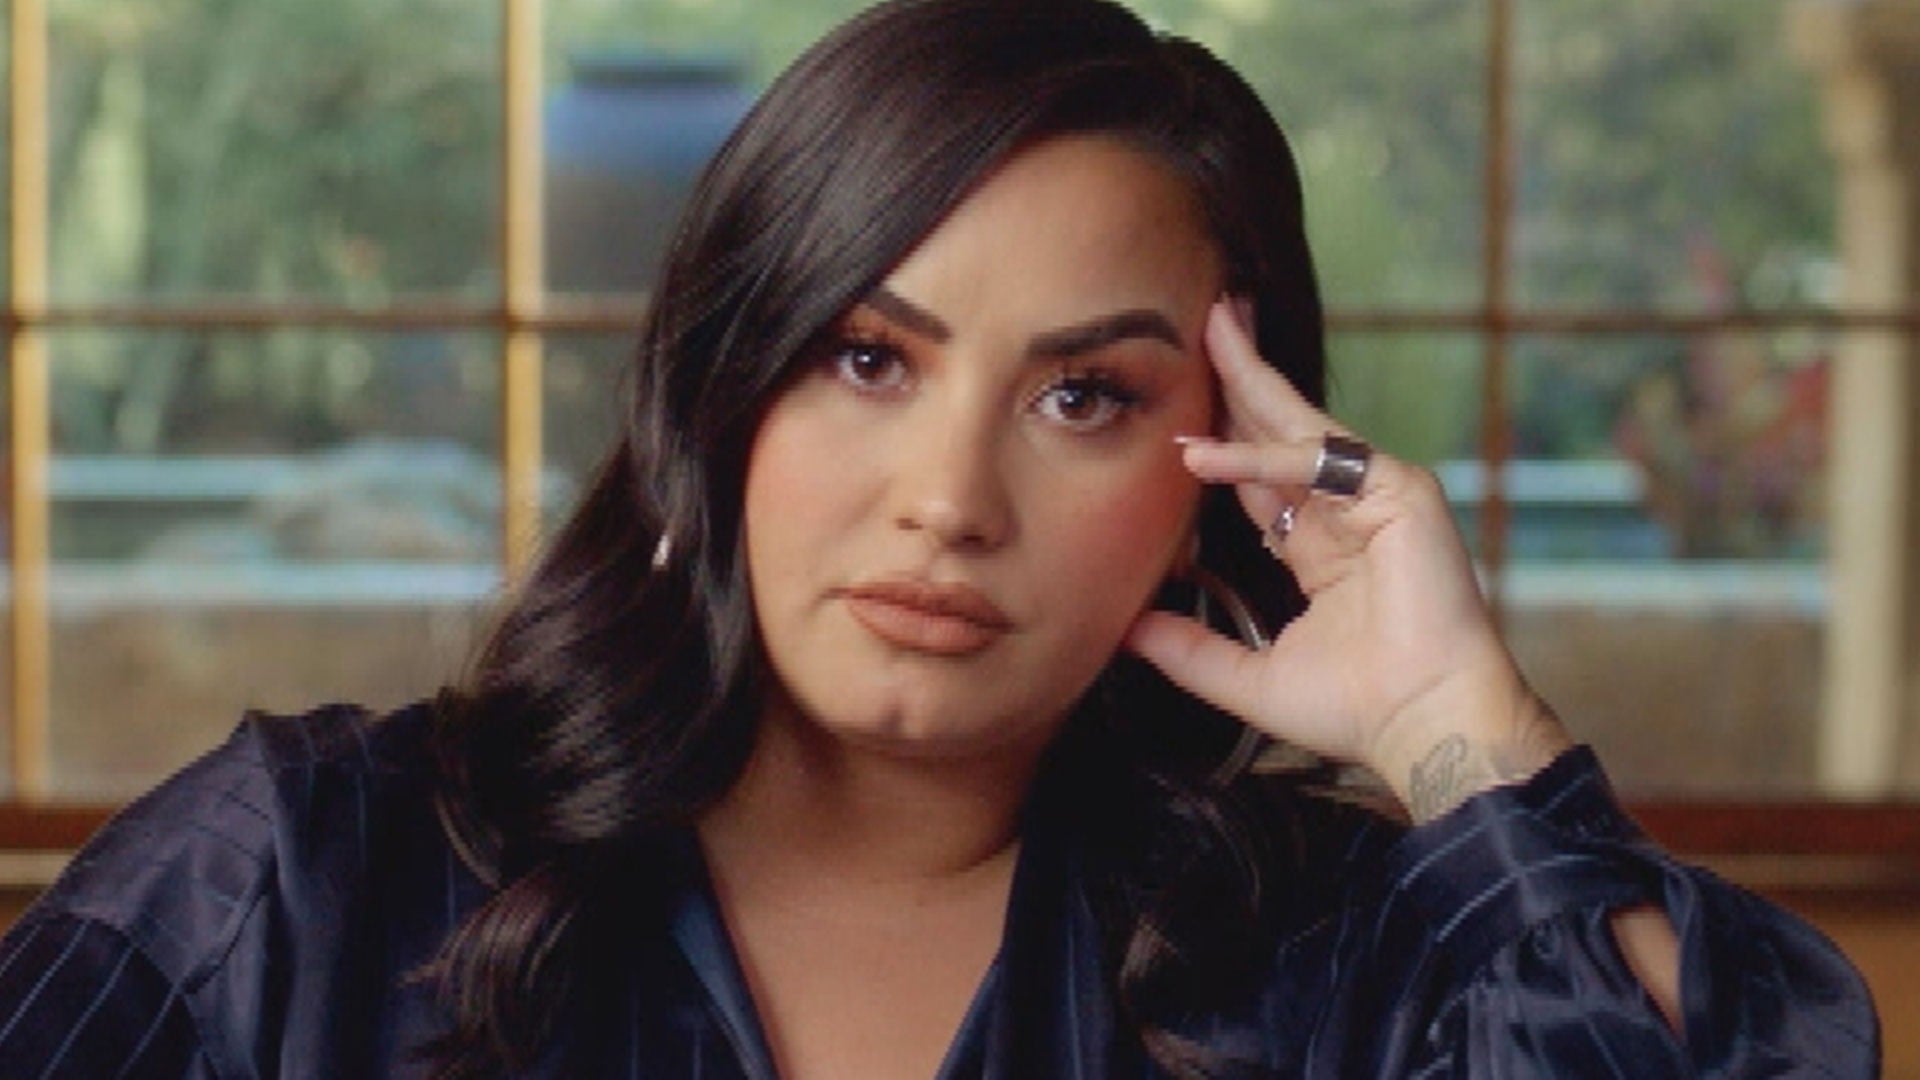 Demi Lovato says she lost virginity ‘in a rape’ as a teen; was molested by her drug dealer the night of her 2018 overdose